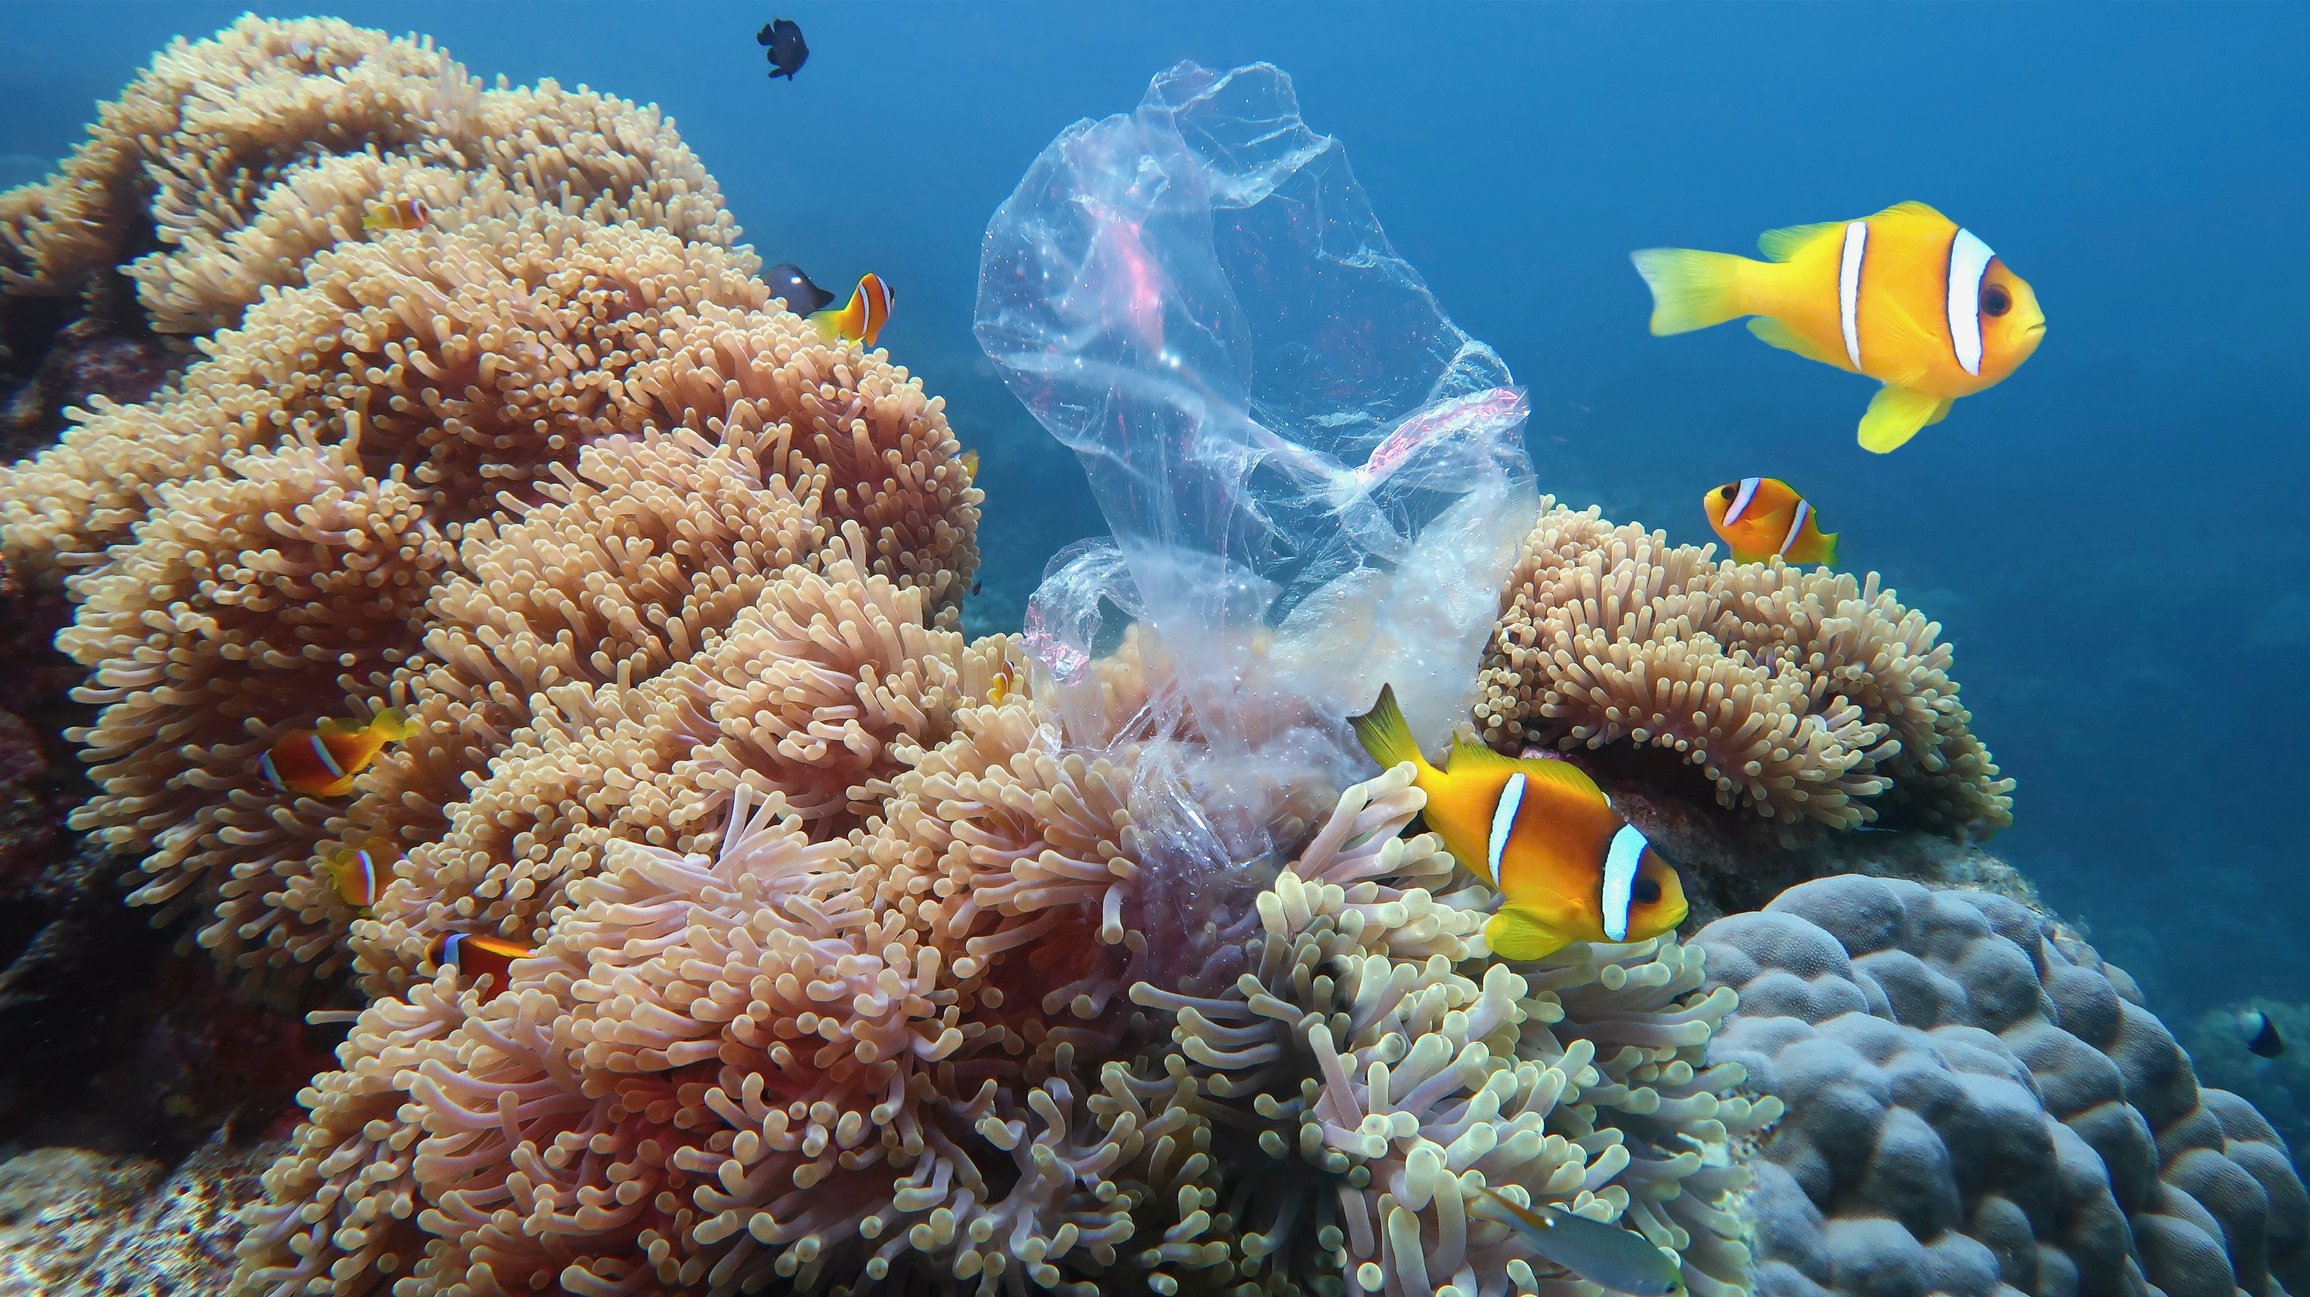 https://truthout.org/app/uploads/2019/10/2019_1021-coral-reef-plastic.jpg